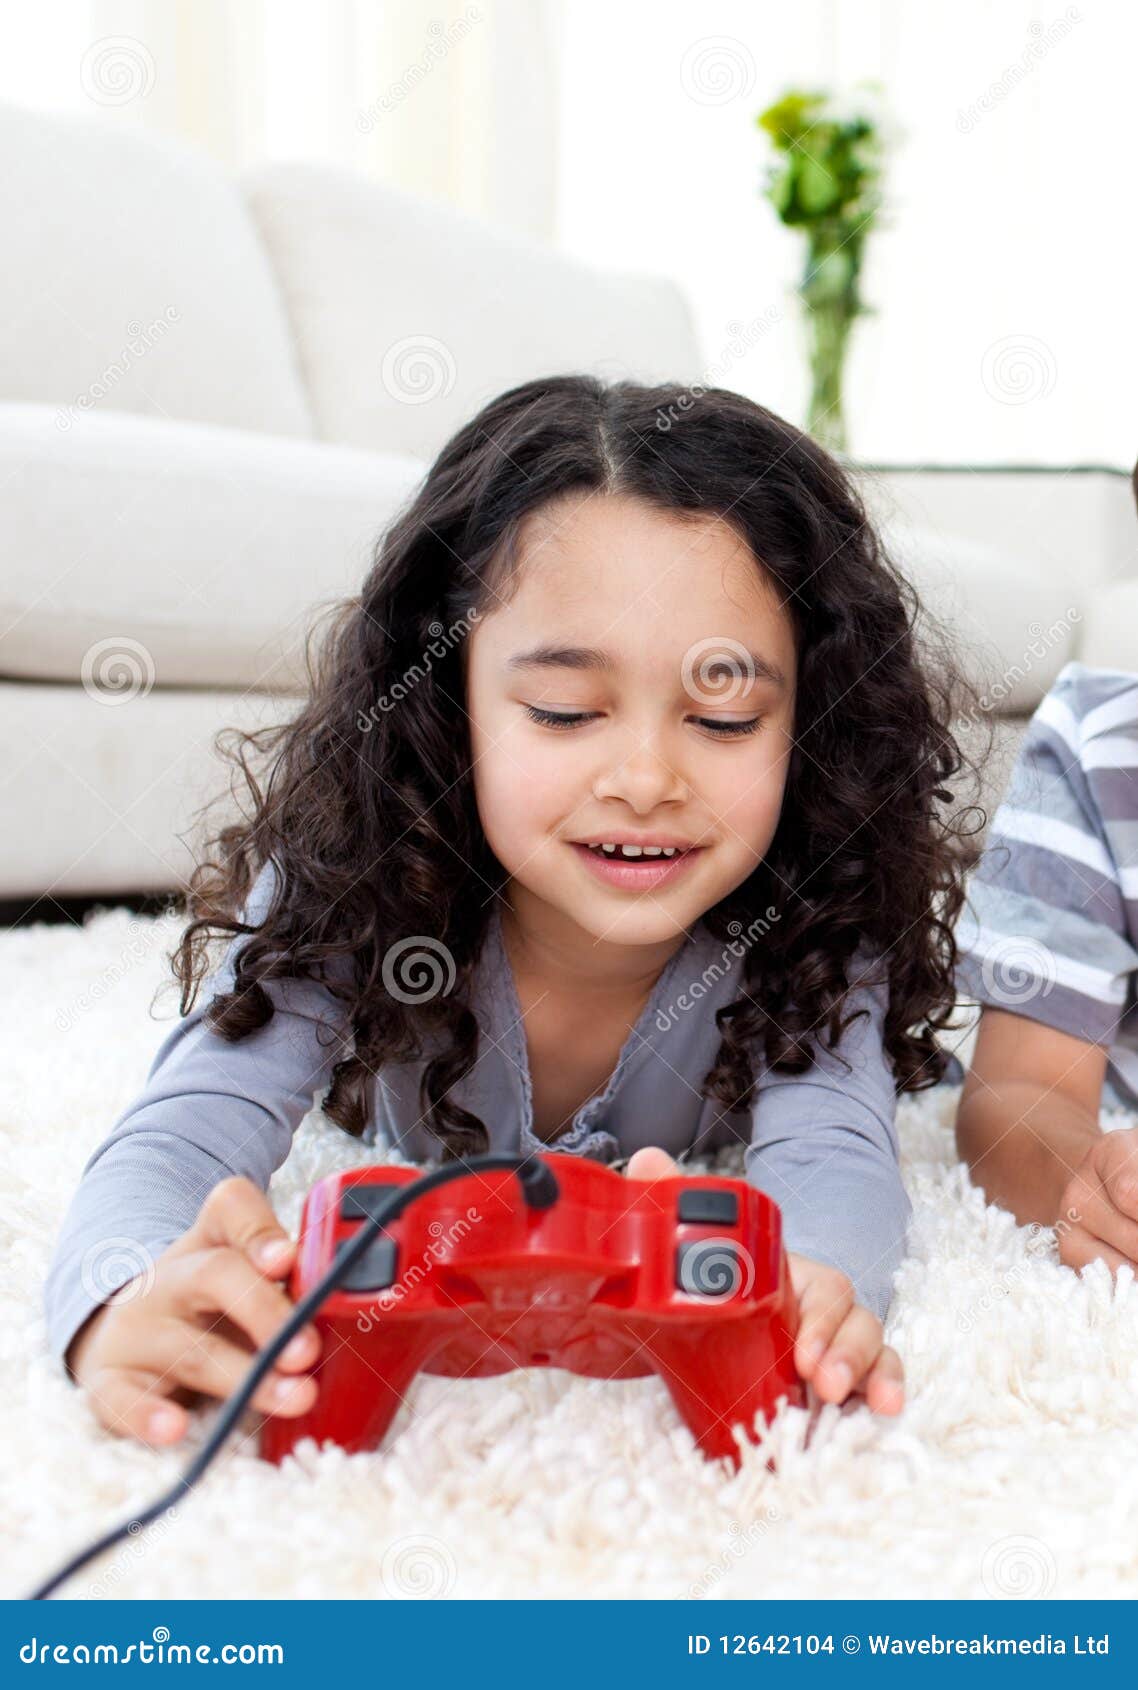 Cute Girl Playing Video Games Lying On The Floor Stock Imag